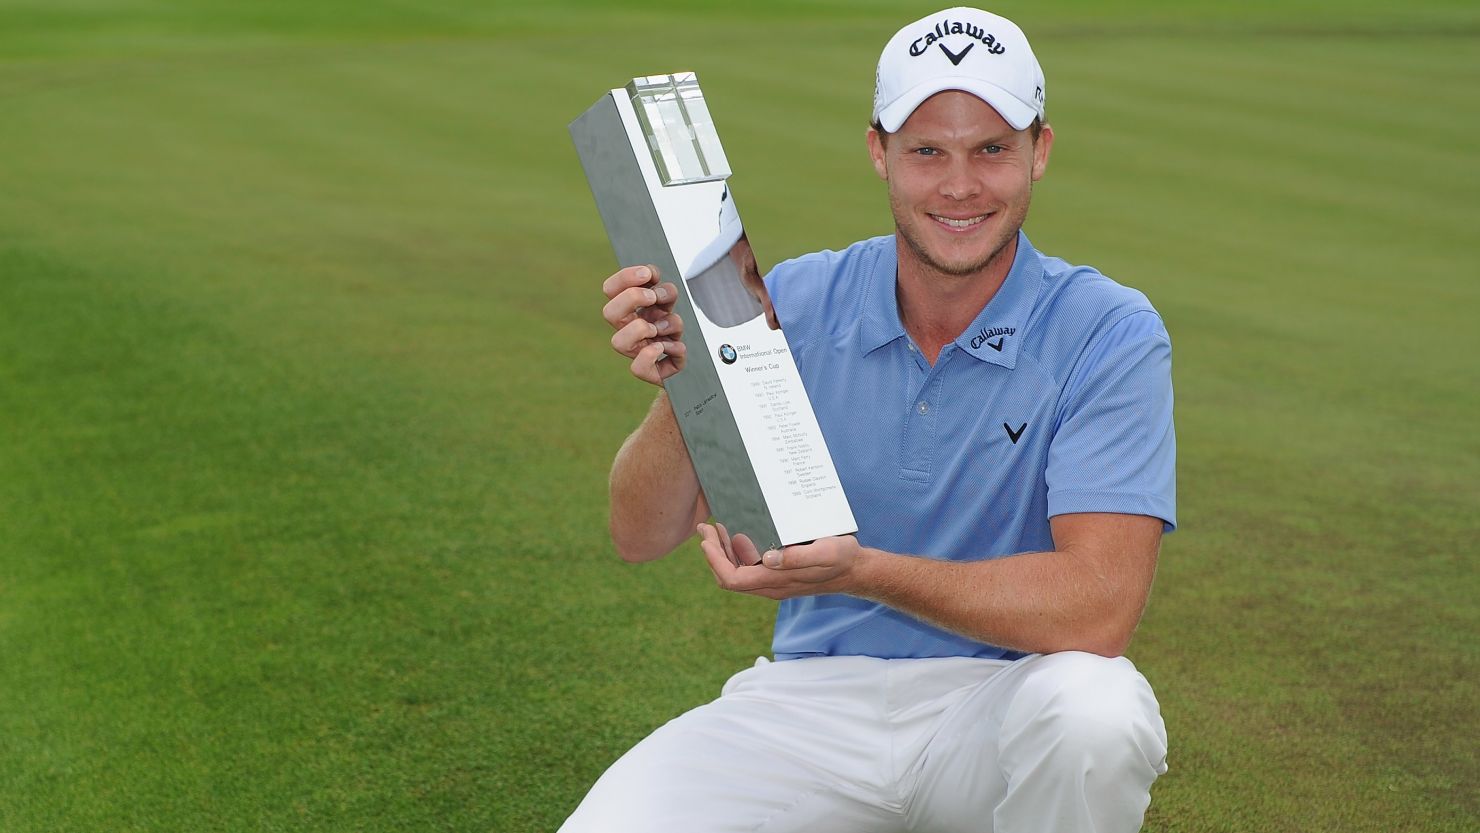 Danny Willett with the winning trophy from the BMW International Open in Cologne.